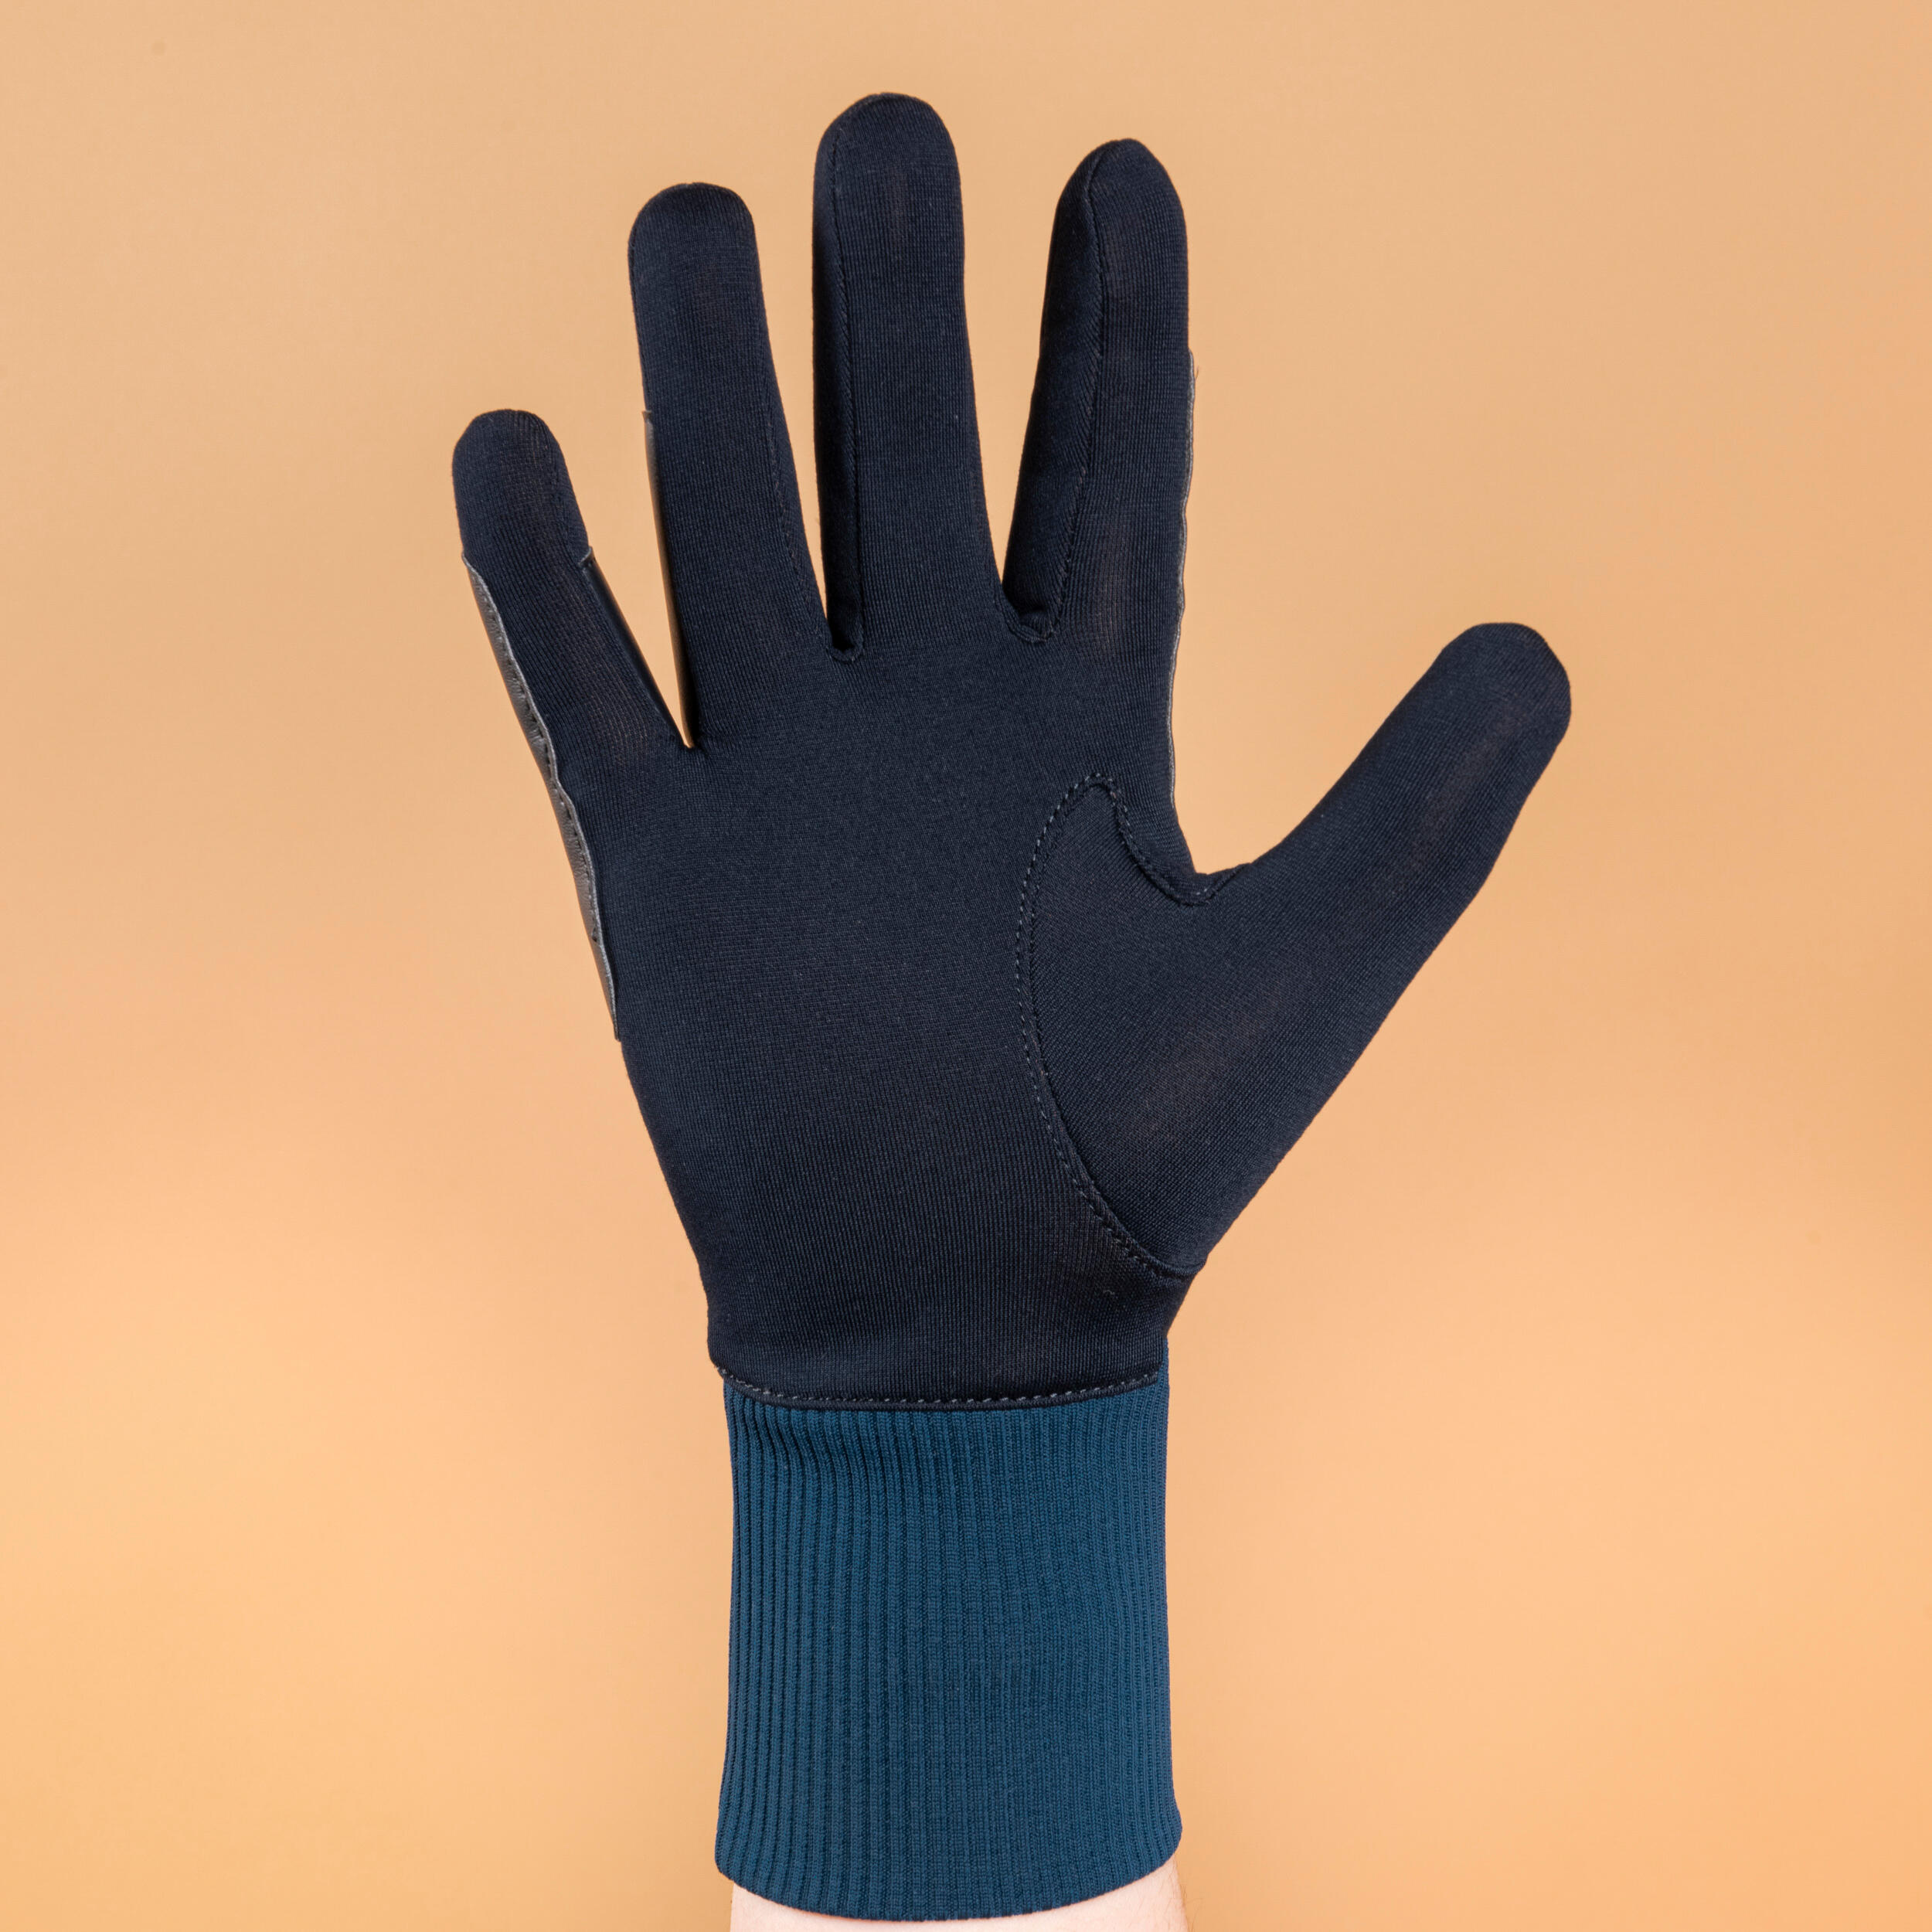 Kids' Horse Riding Gloves 140 Warm - Navy/Turquin Blue 3/4